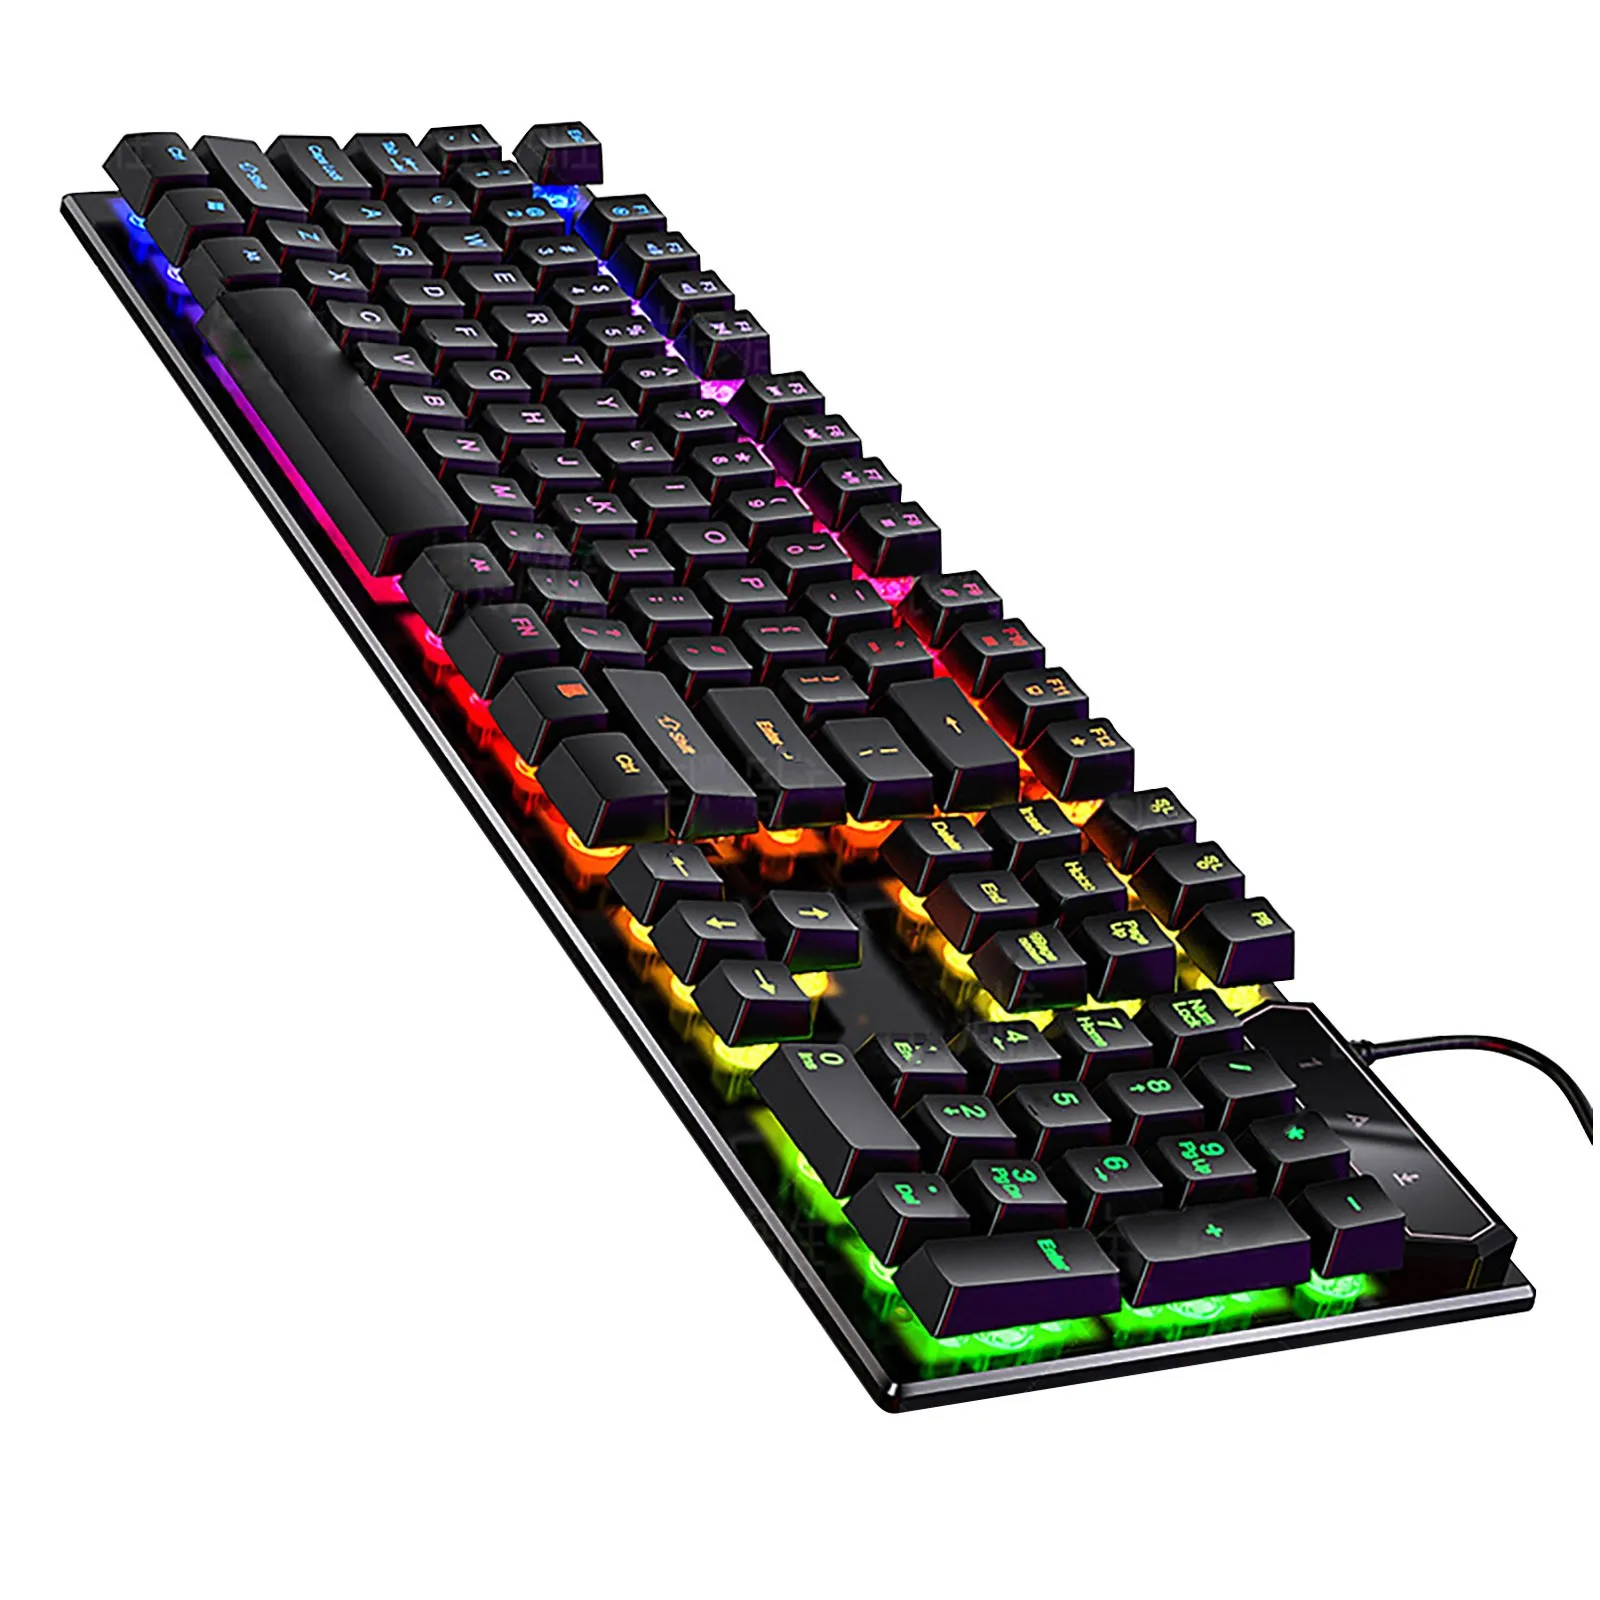 RGB Backlight Computer Accessories Cool Backlit Keyboard/Notebook Desktop Computer Wired USB Out Interface Keyboard Color : B Mechanical Gaming Keyboard DR 